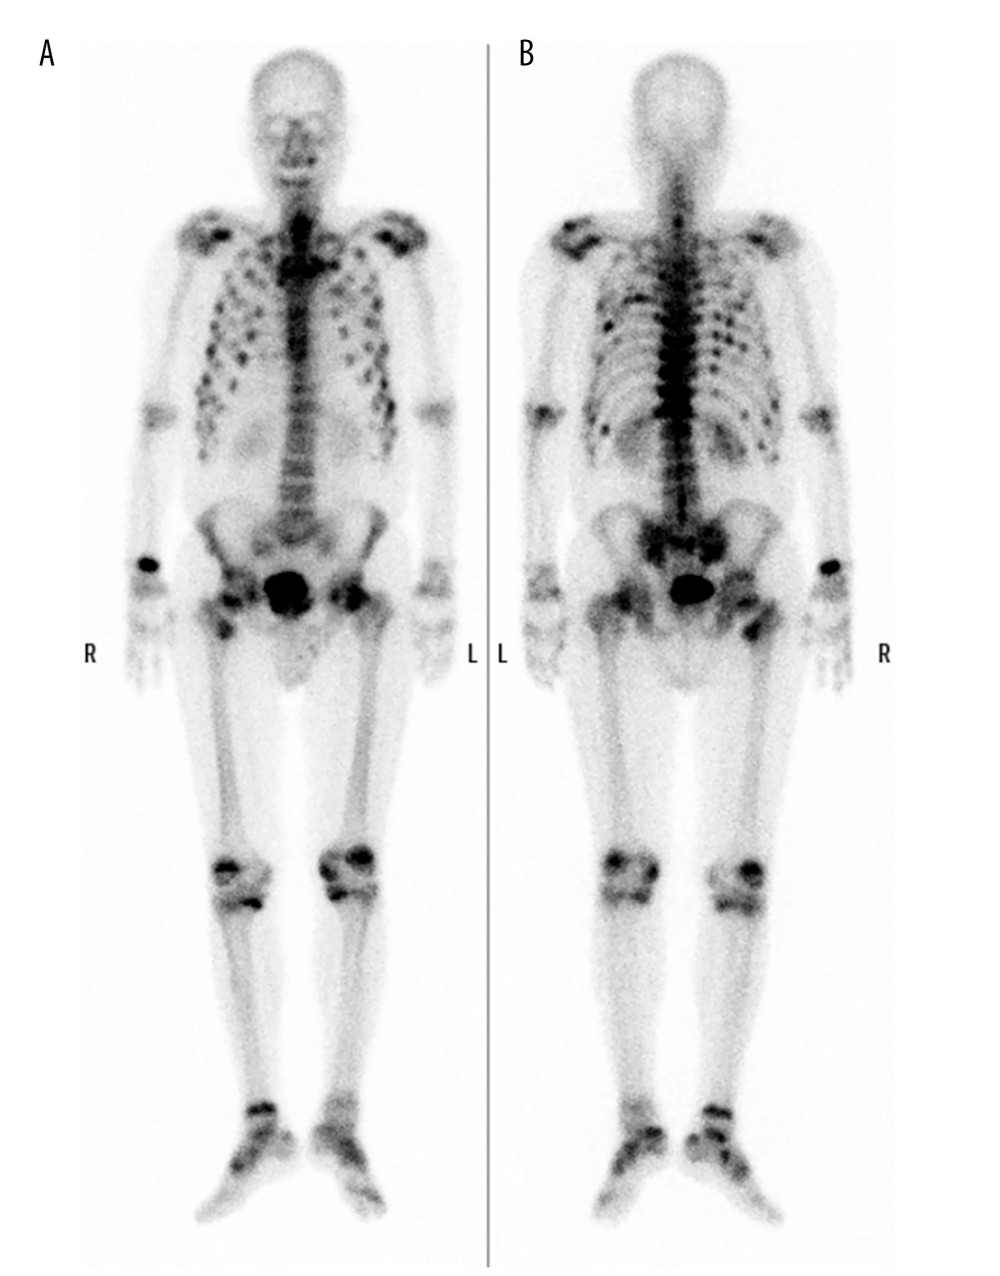 99mTechnetium-hydroxymethylene diphosphate scintigraphy. (A) Anterior view; (B) Posterior view. Multiple accumulations are observed in the bilateral ribs, bilateral proximal femurs, right proximal tibia, distal radius, bilateral sacroiliac joints, and sacrum.